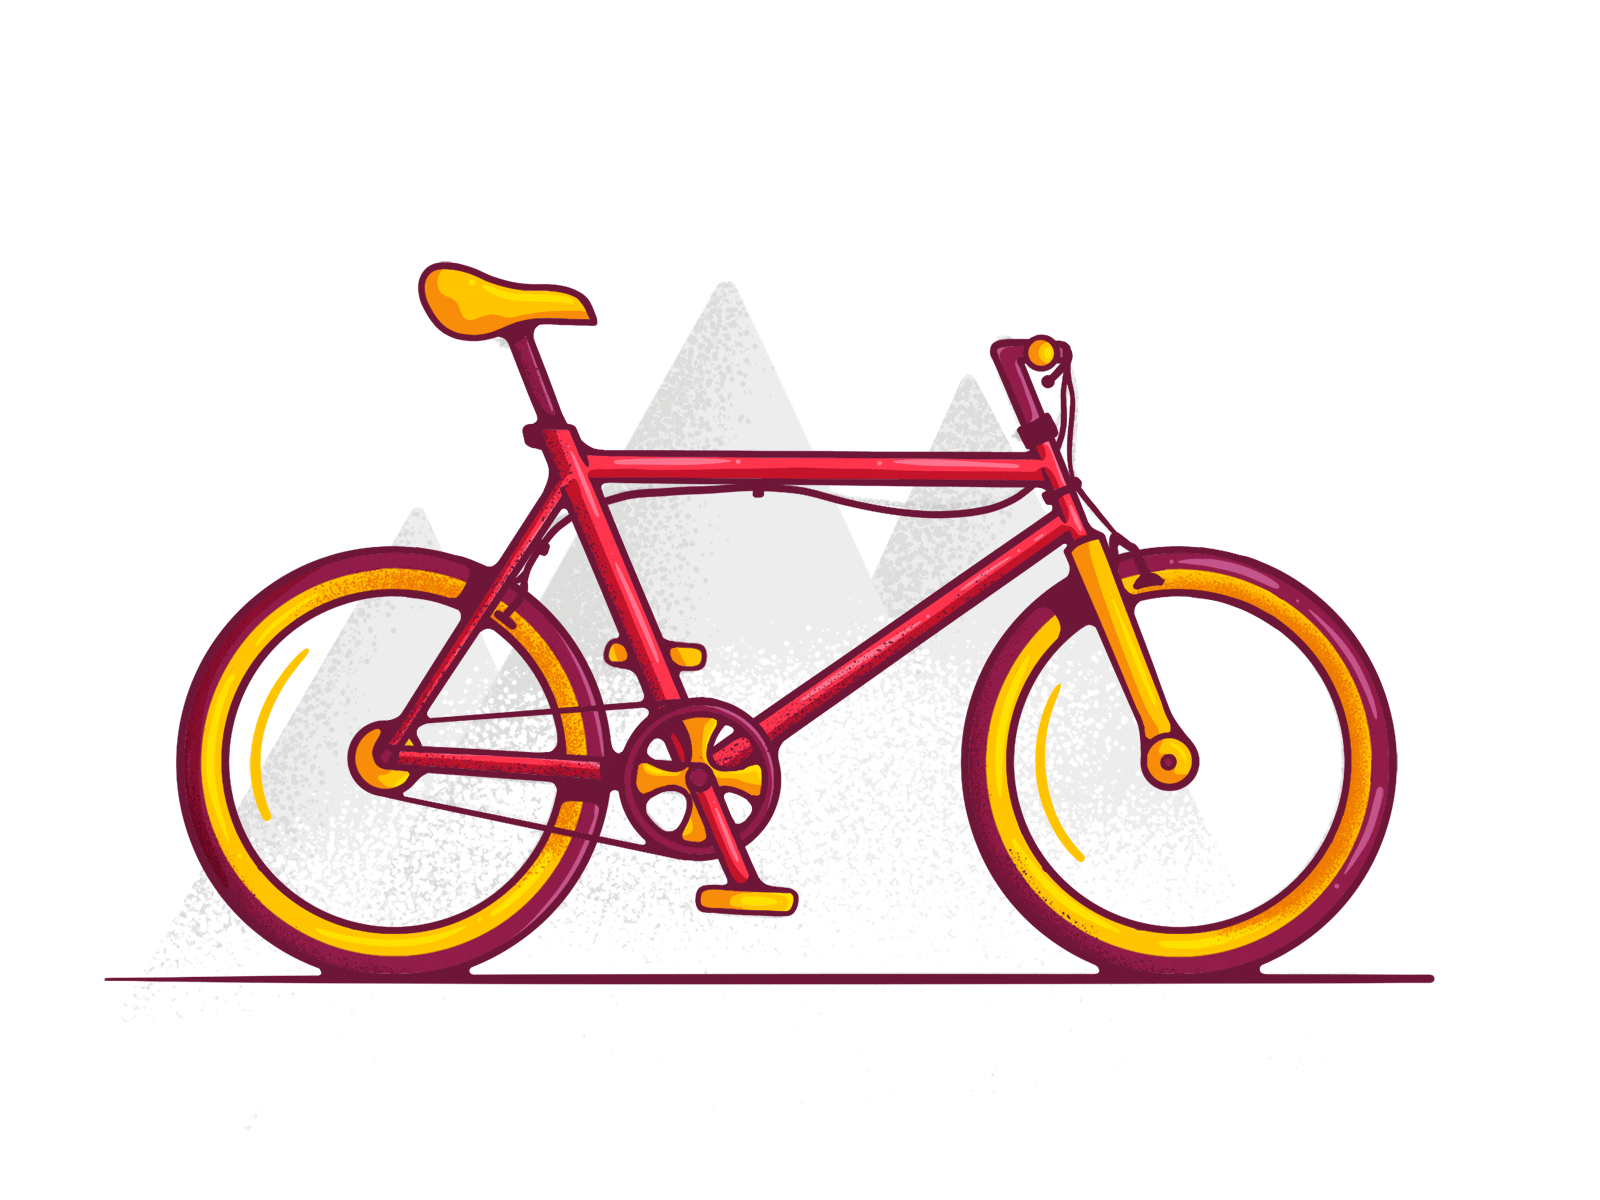 Biking! adventure bicycle bike cycle design exercise fit flat illustration healthy illustration mountains muscle off road procreate red sketch texture yellow